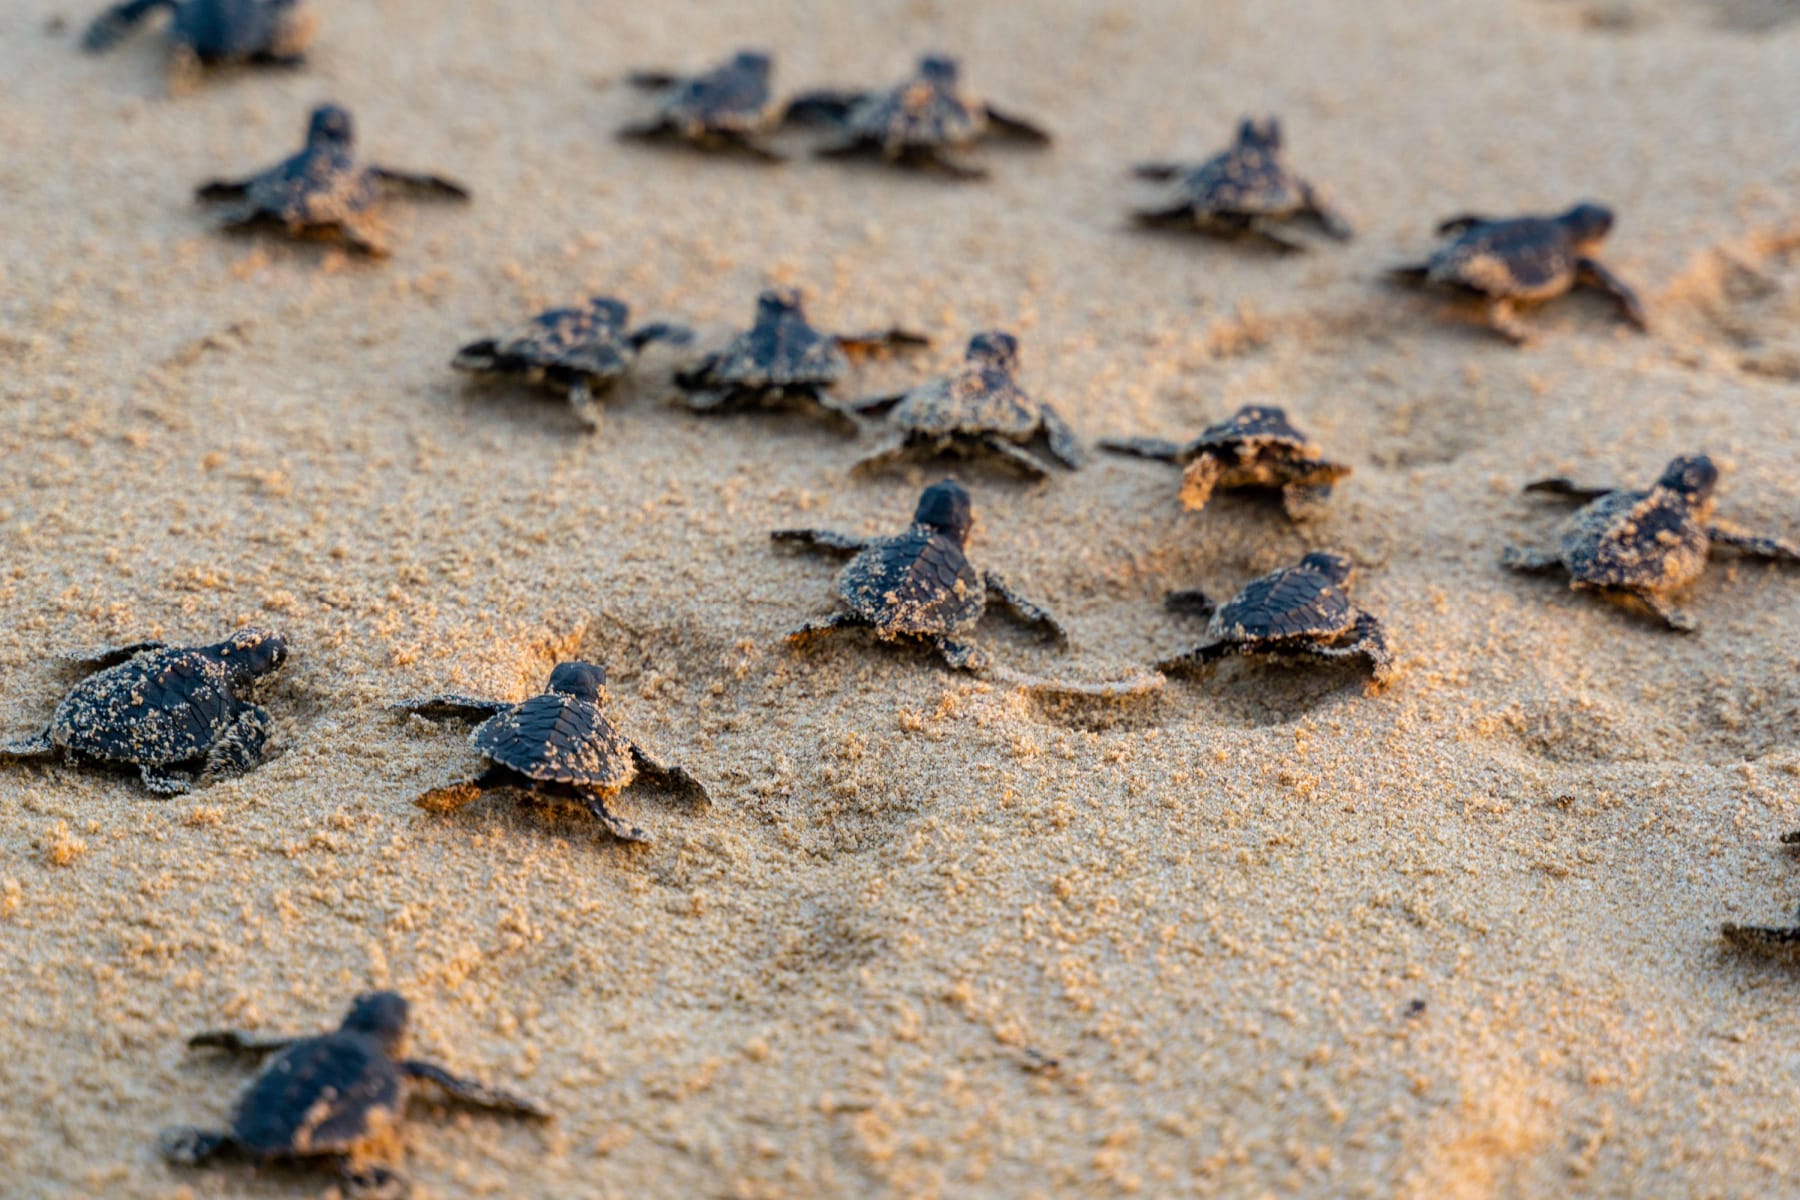 Sea Turtle hatchlings making their way across a sandy beach, one of the top sights at Dry Tortugas National Park.